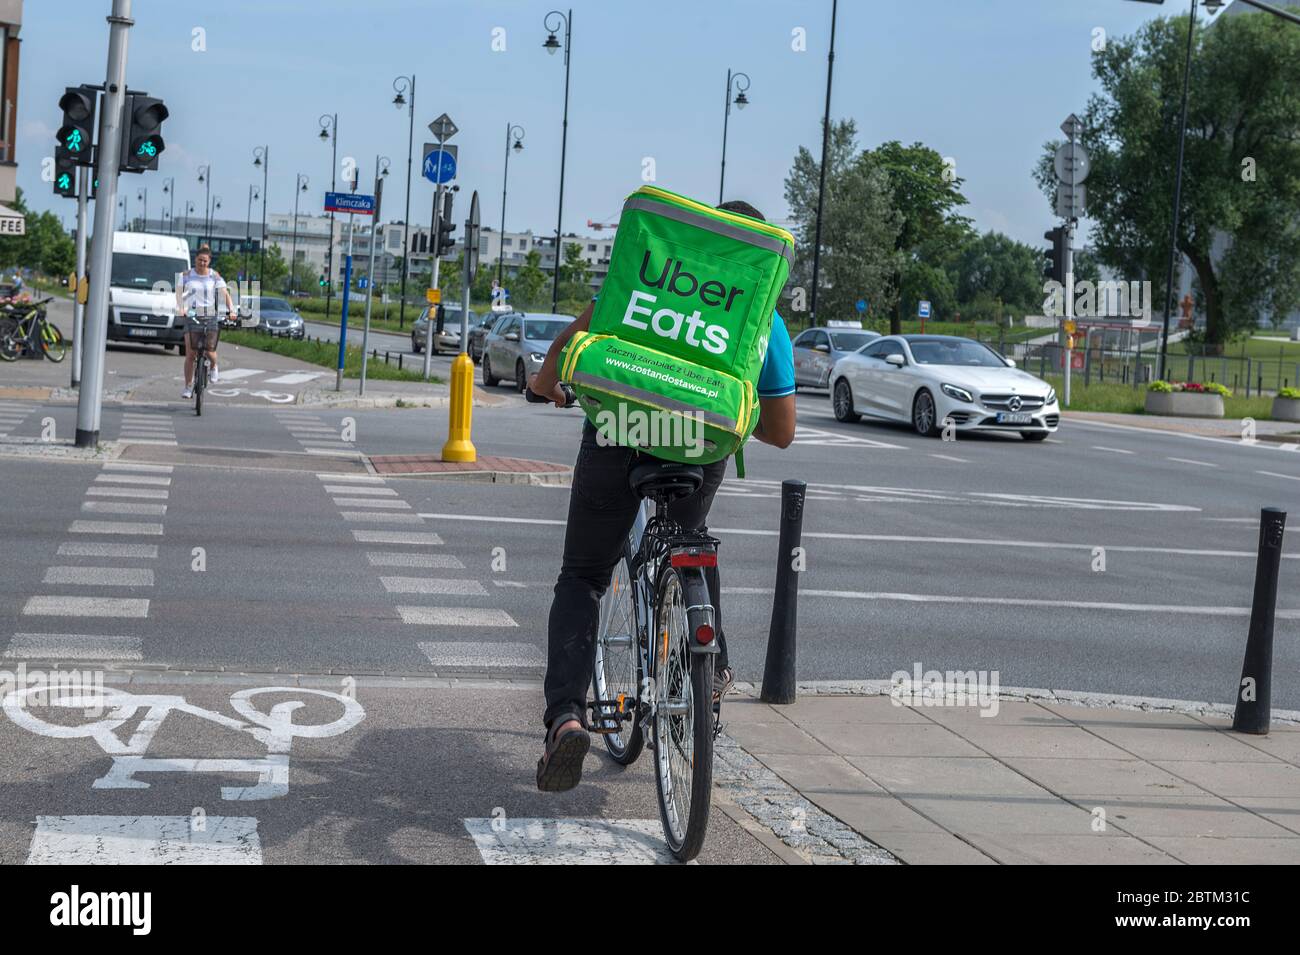 WARSAW, POLNAD - June 15, 2019: UberEATS cycle delivery courier. Uber Eats delivery in progress on Warsaw street - Poland. UberEATS is online food ord Stock Photo